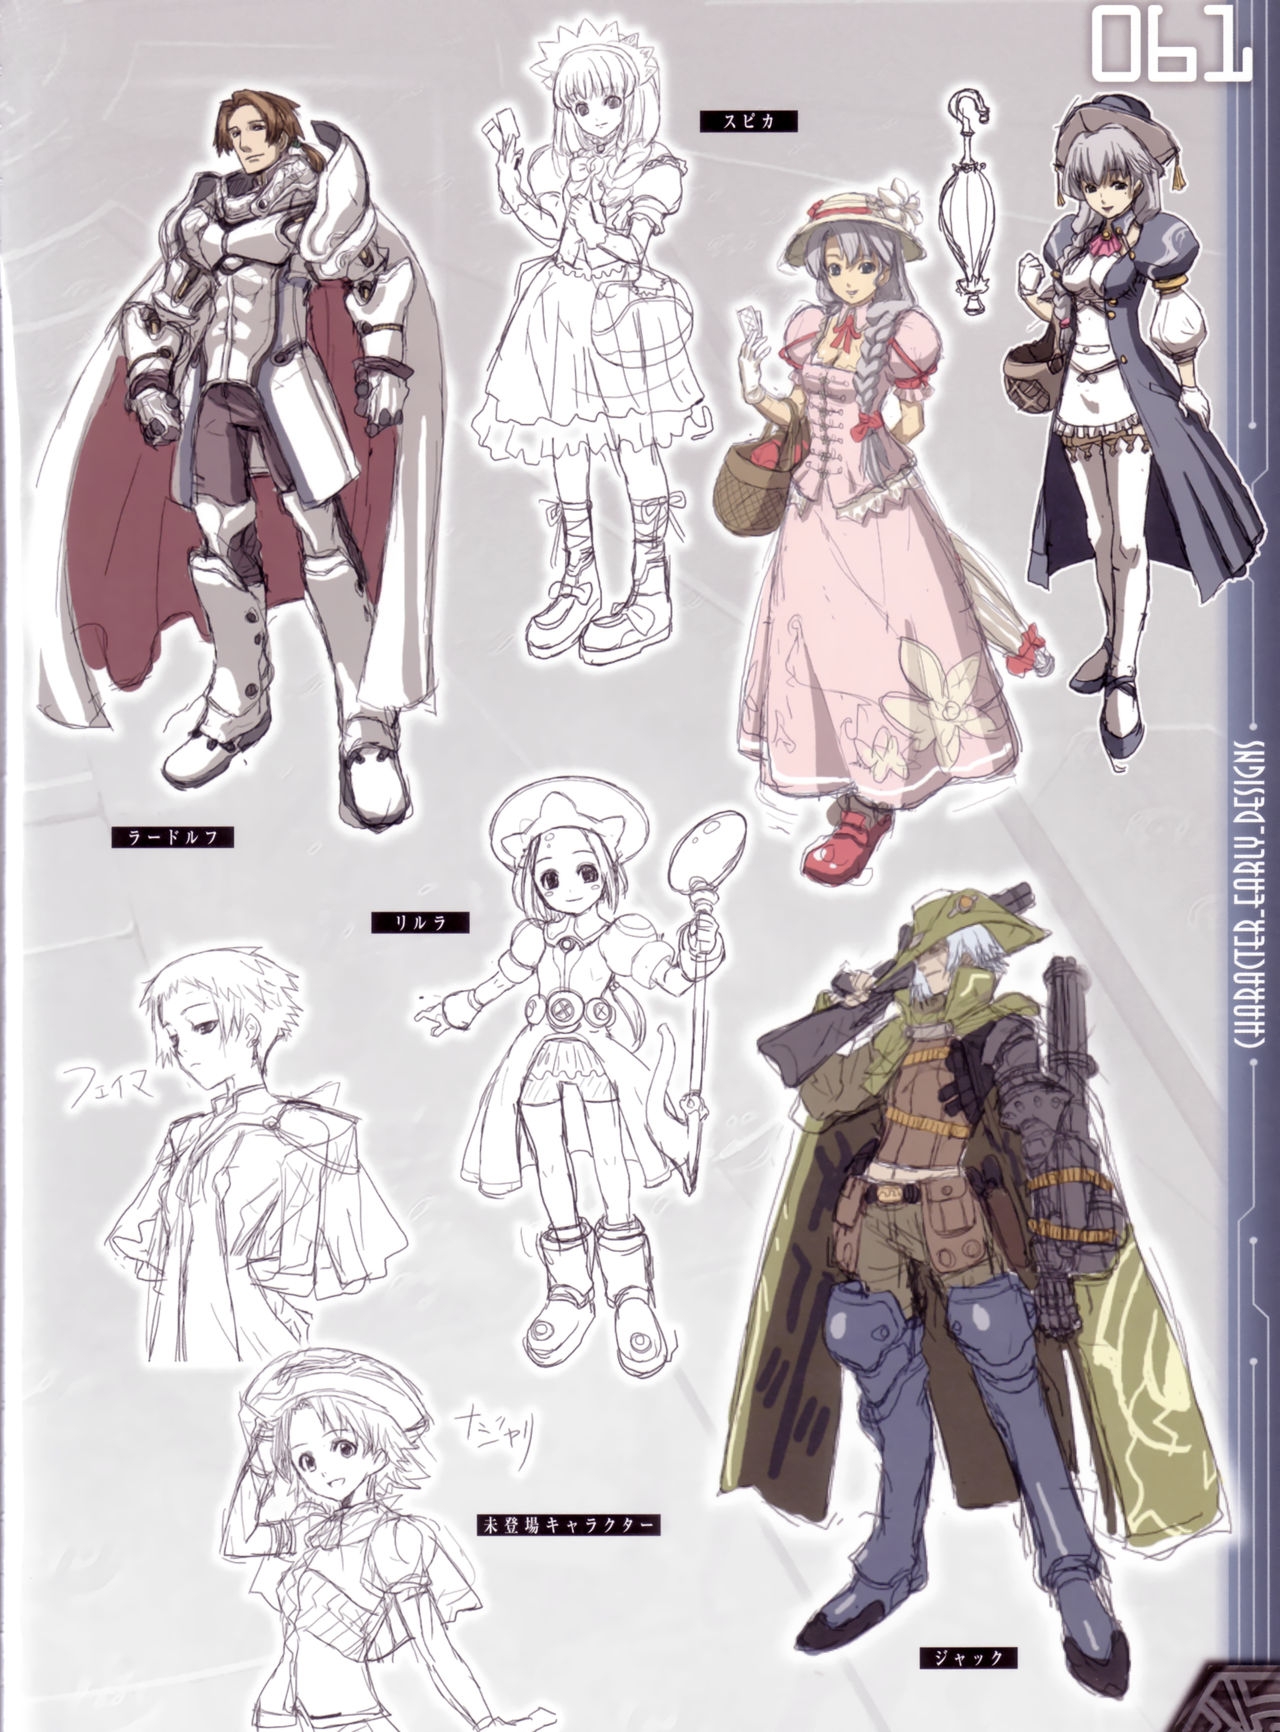 The Ar tonelico Official Setting Materials Collection Book 51